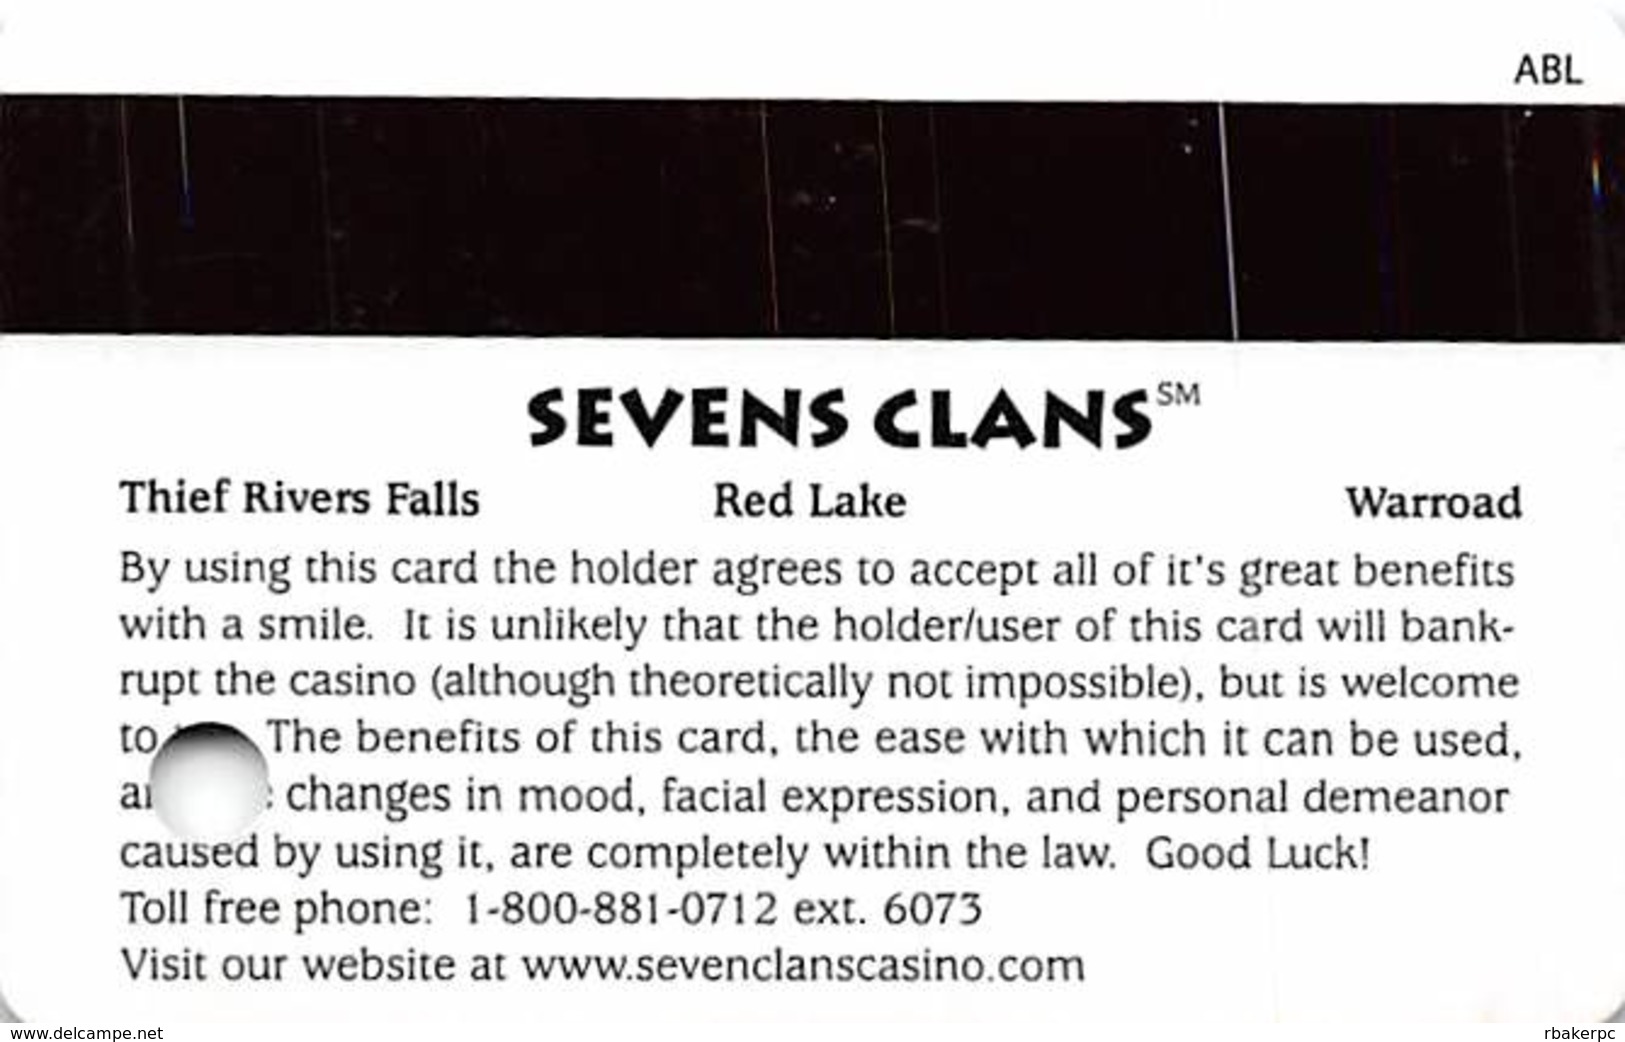 Seven Clans Casinos MN USA Slot Card - ABL Over Mag Stripe - Casino Cards